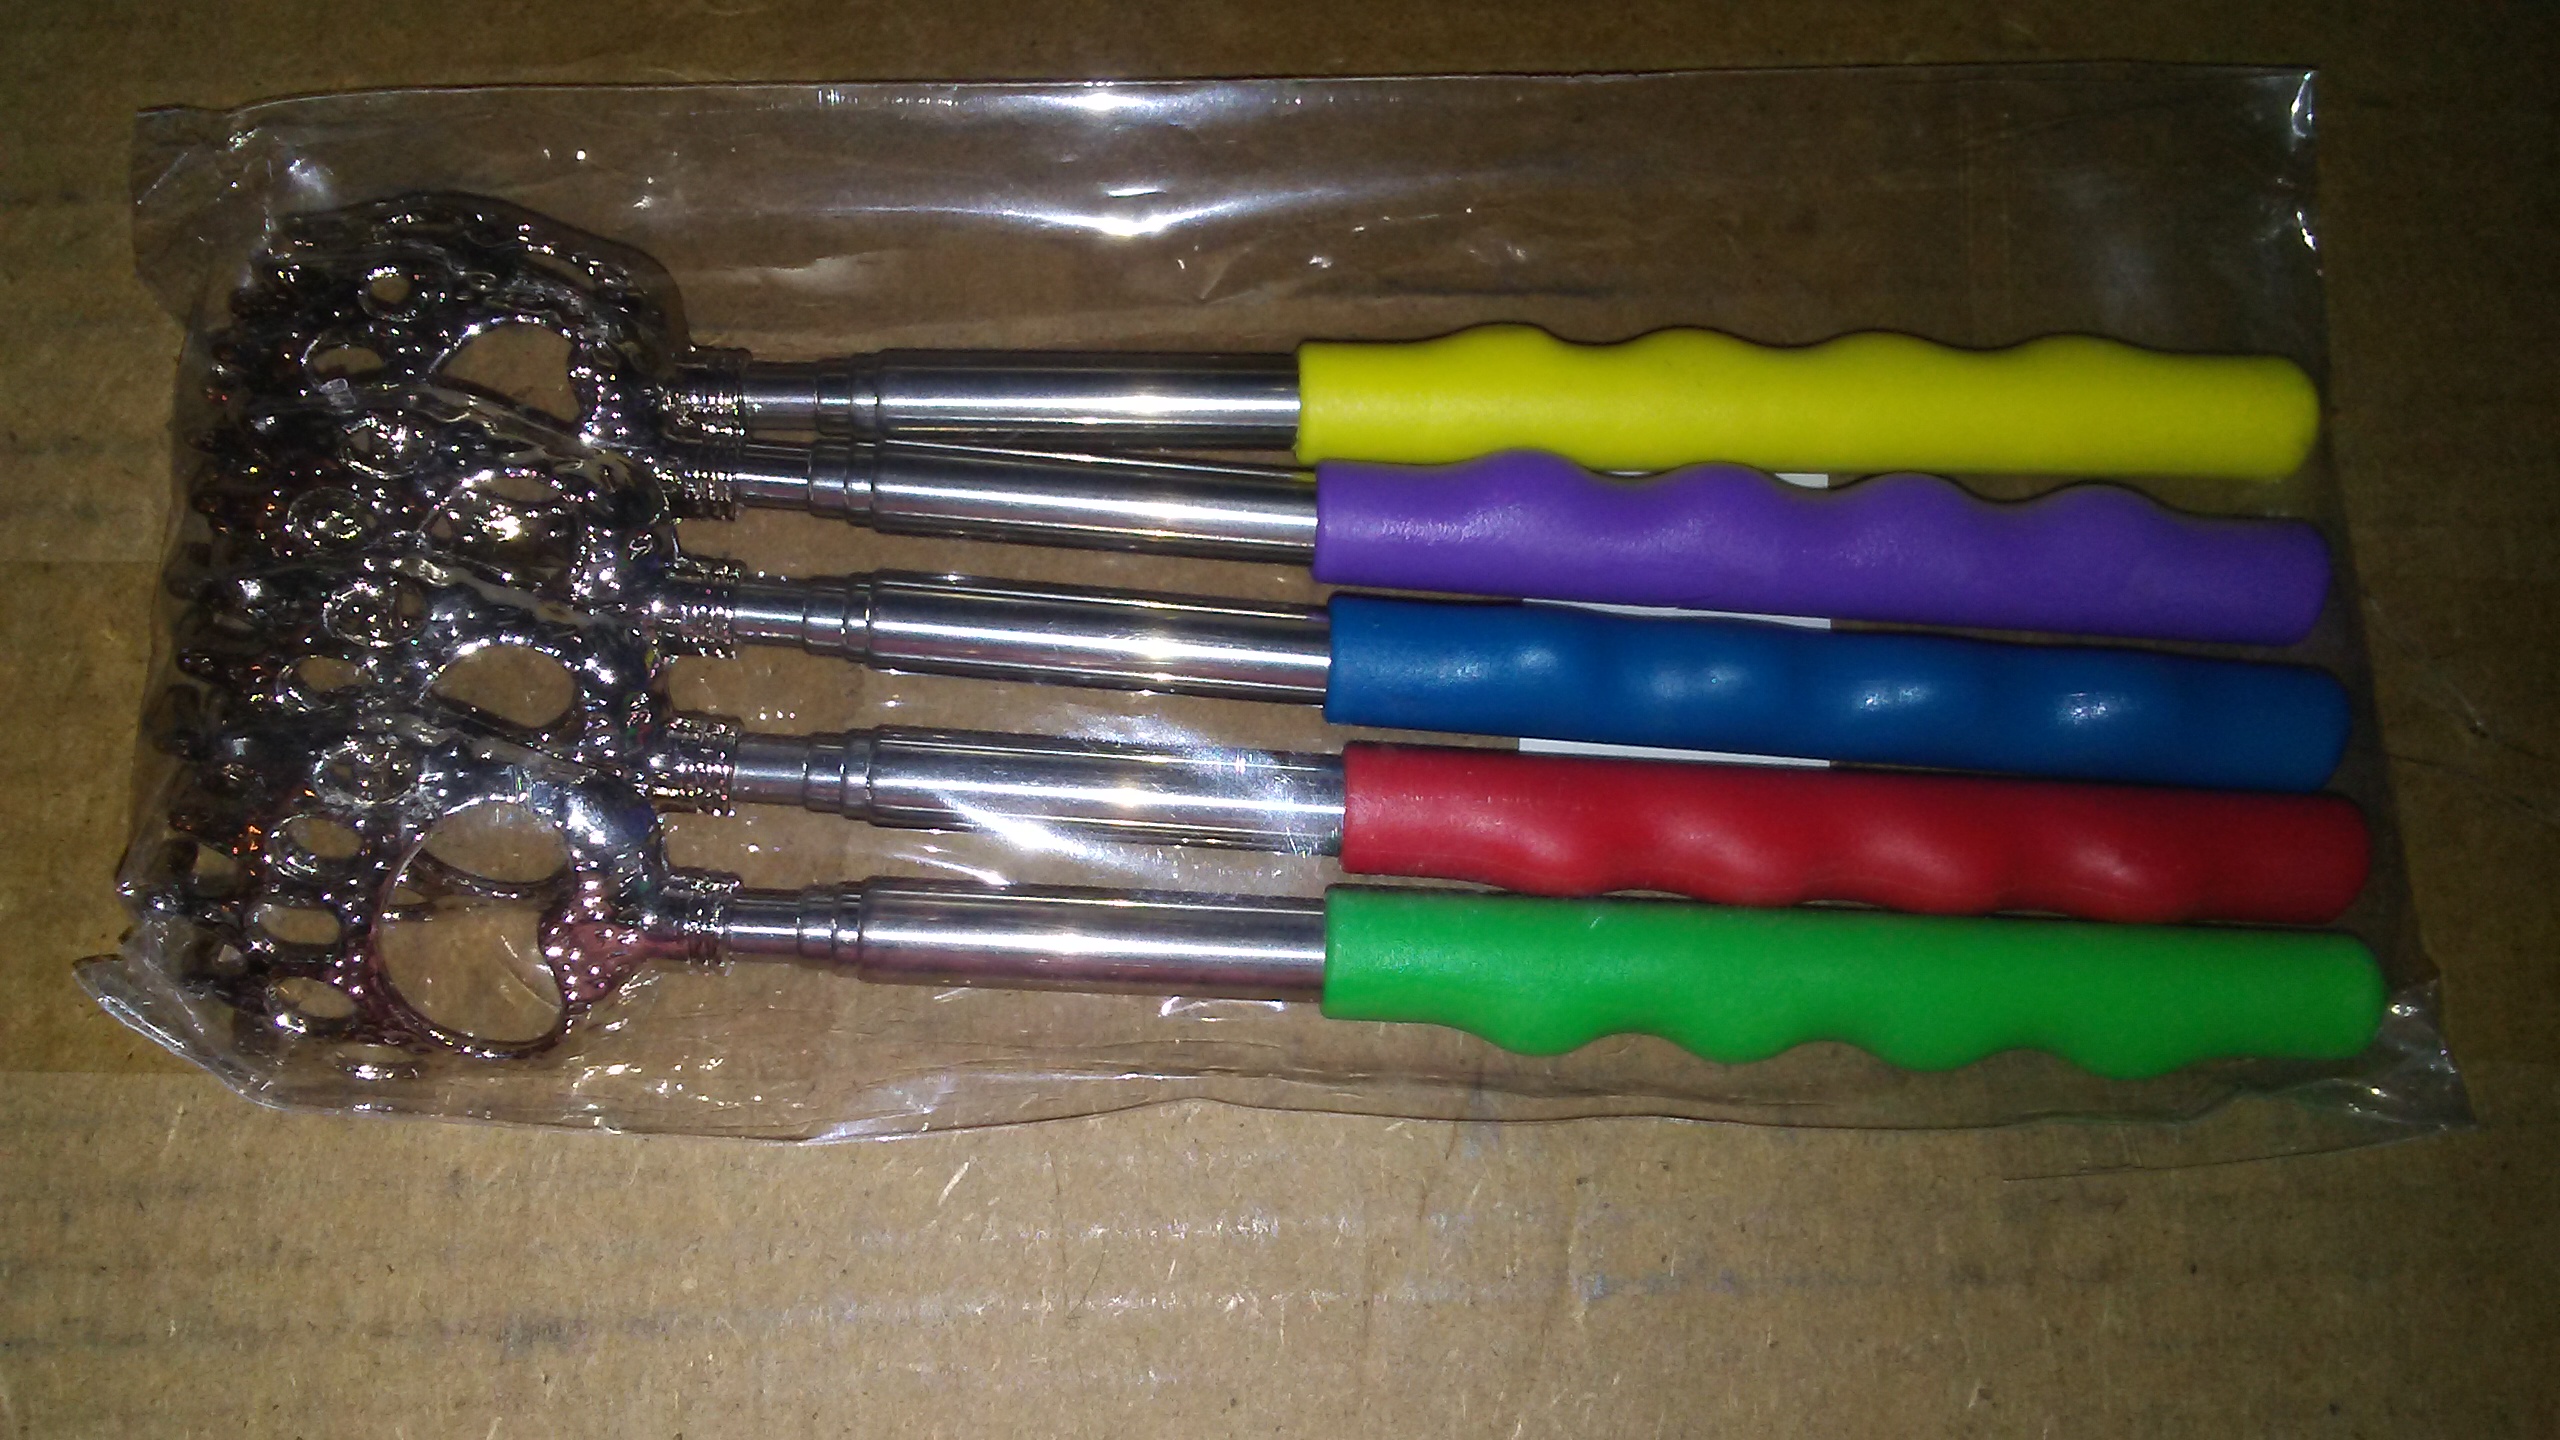 Very handy and convenient back scratchers that you can take anywhere